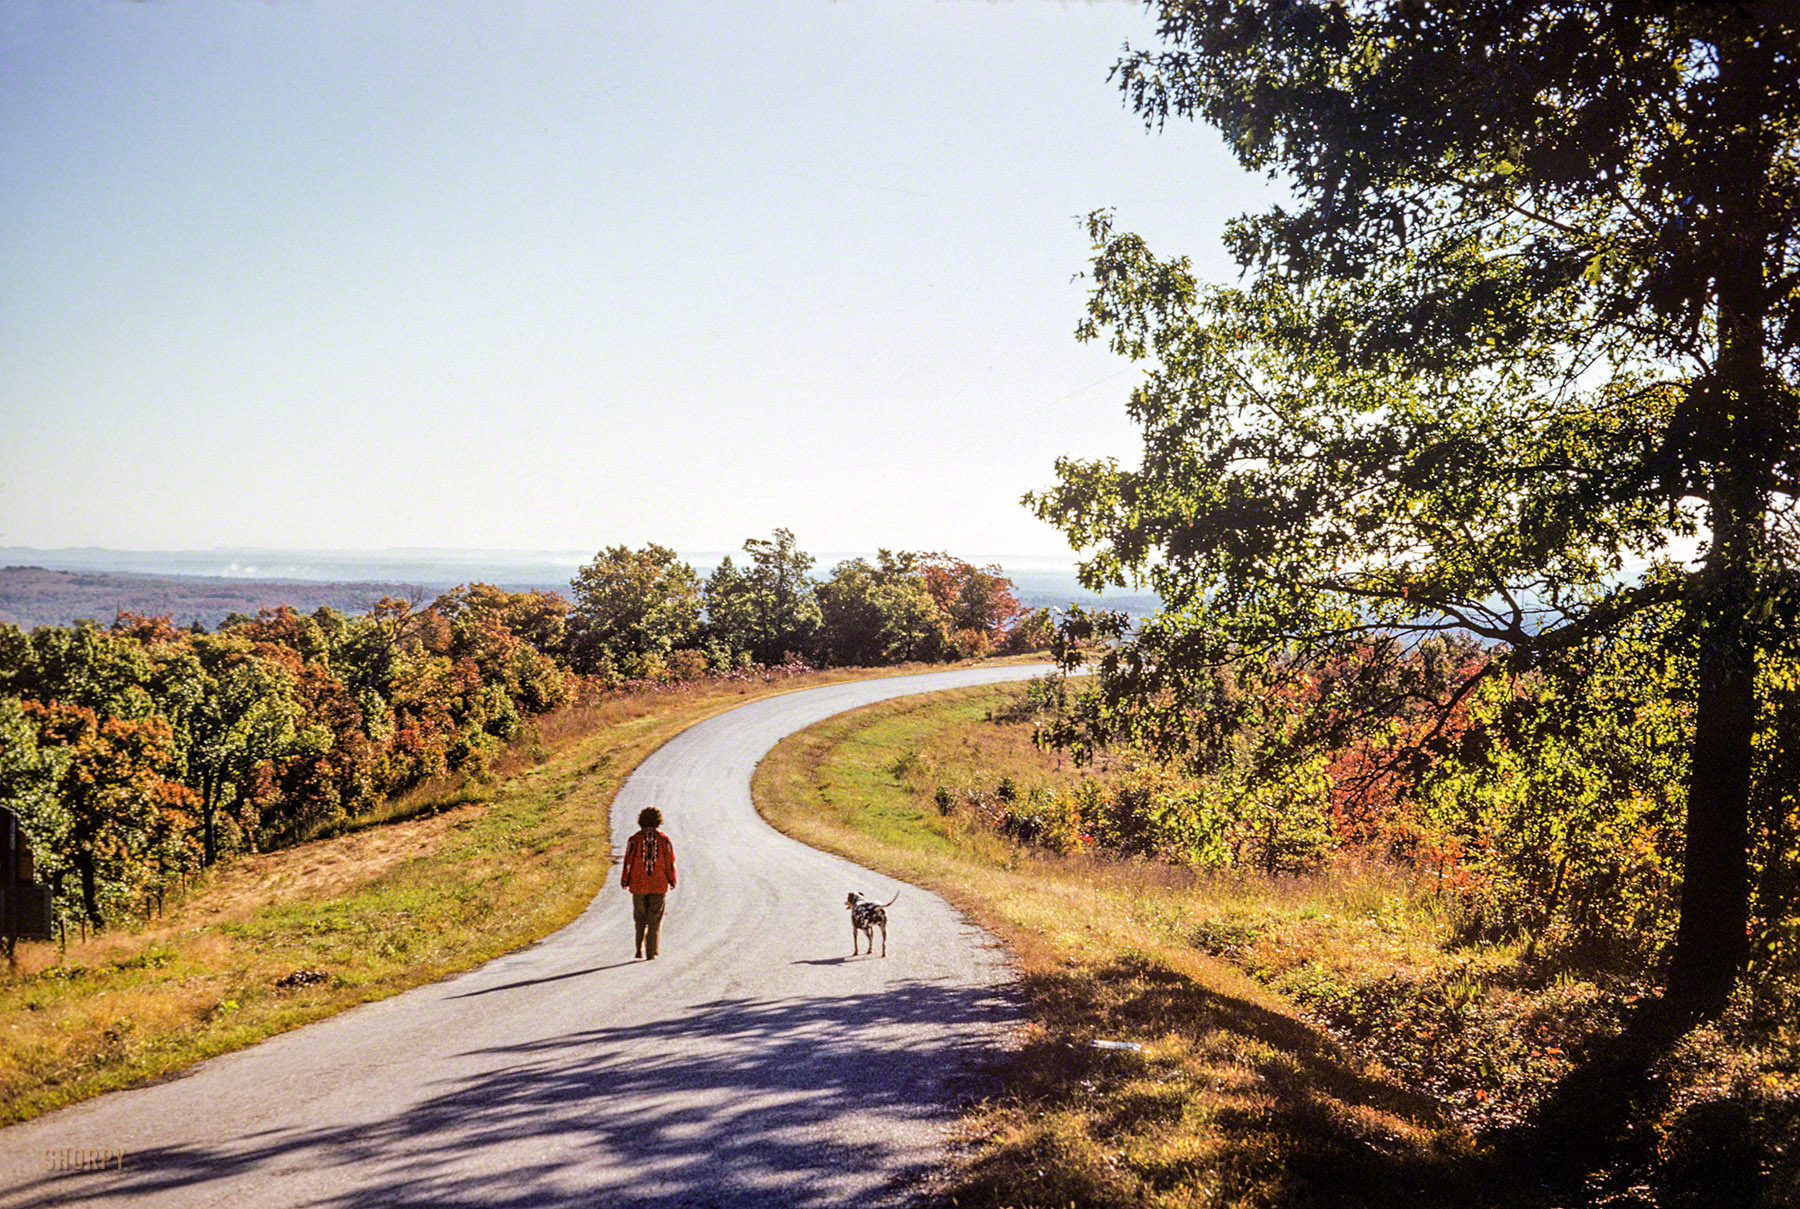 "Shepherd of the Hills country - 7 Oct 1952." In this latest installment of Minnesota Kodachromes, Grace and Sally take a walk in the Missouri Ozarks. 35mm color slide by Hubert Tuttle. View full size.